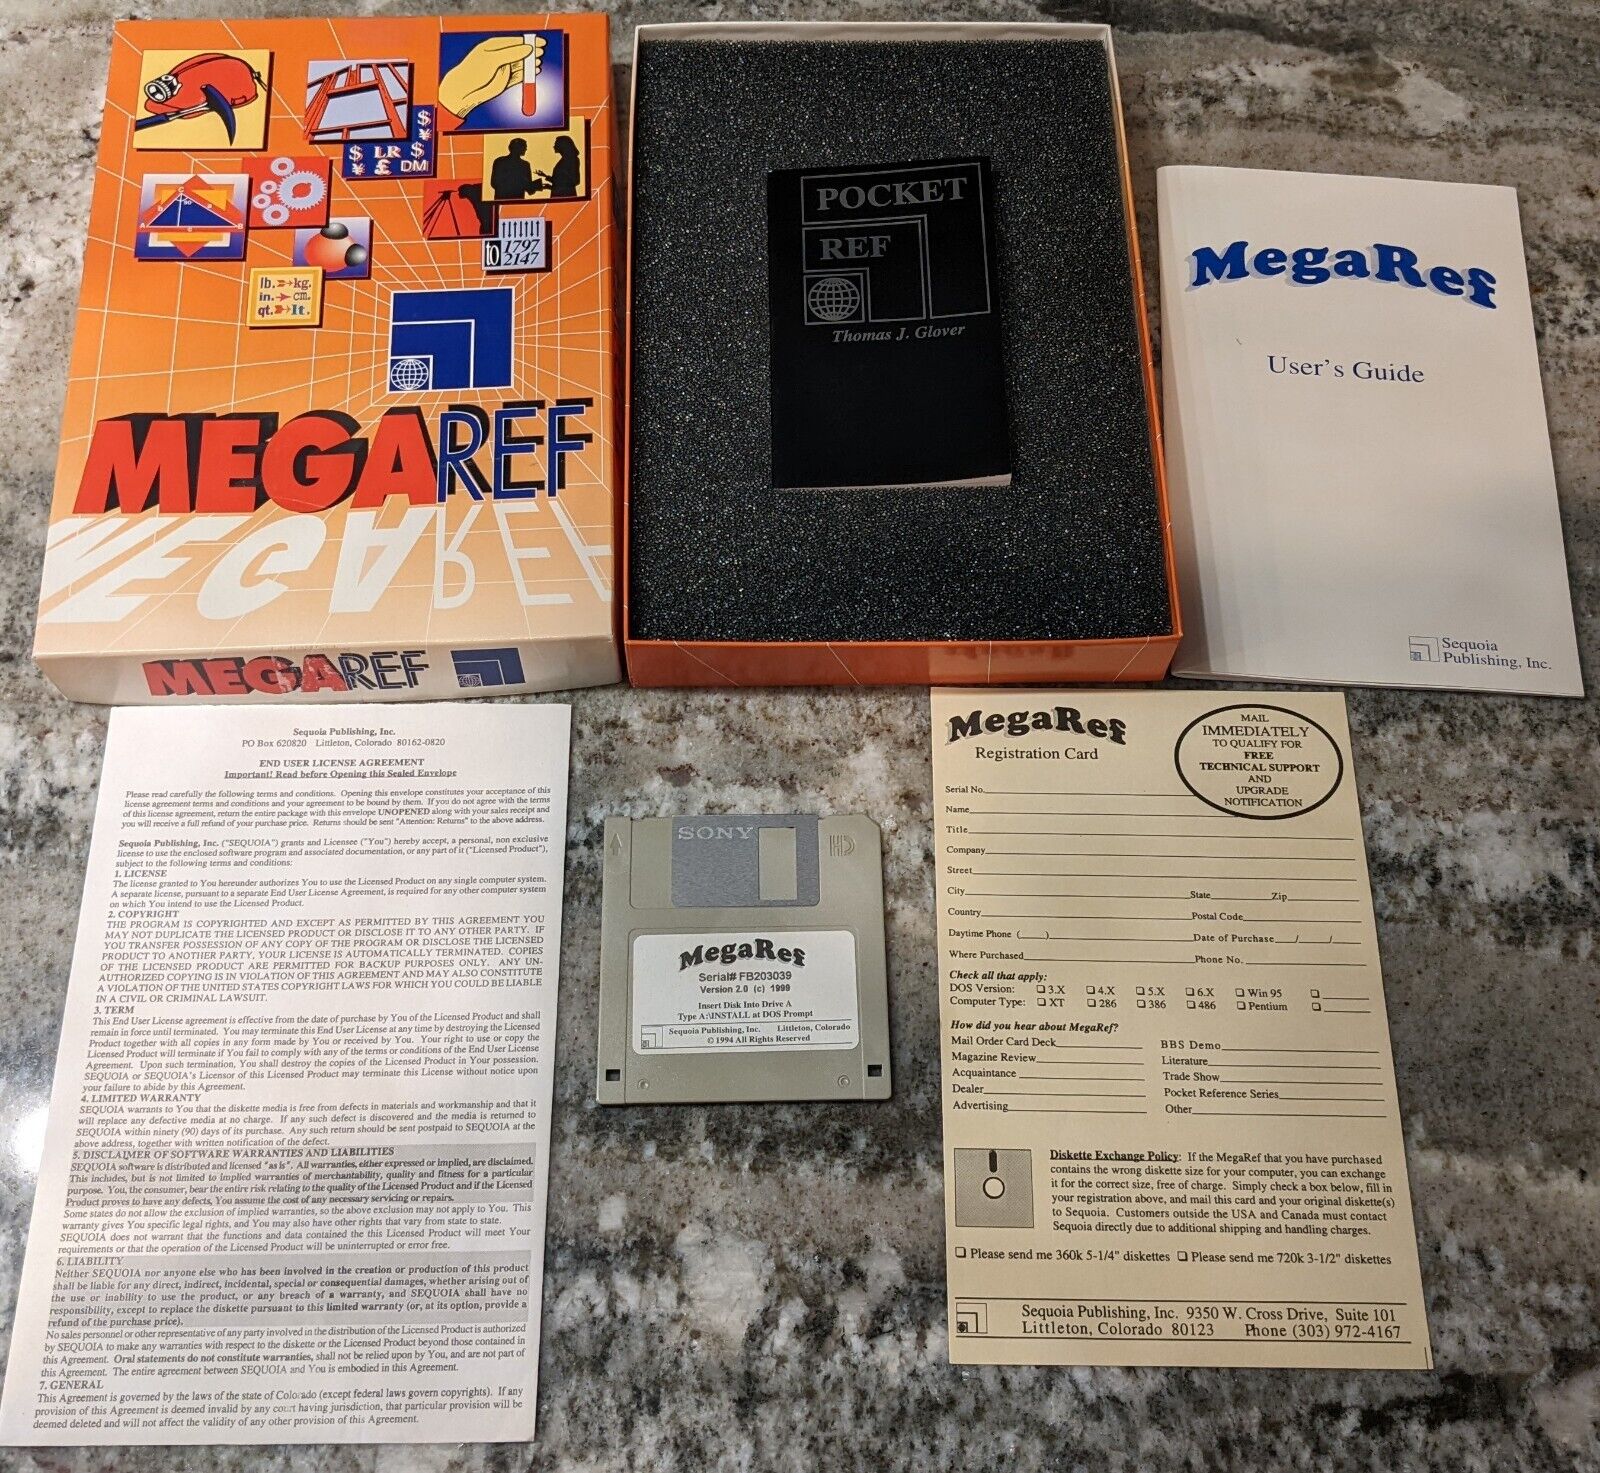 RARE MegaRef Vintage PC Floppy Disk Software by Sequoia Publishing